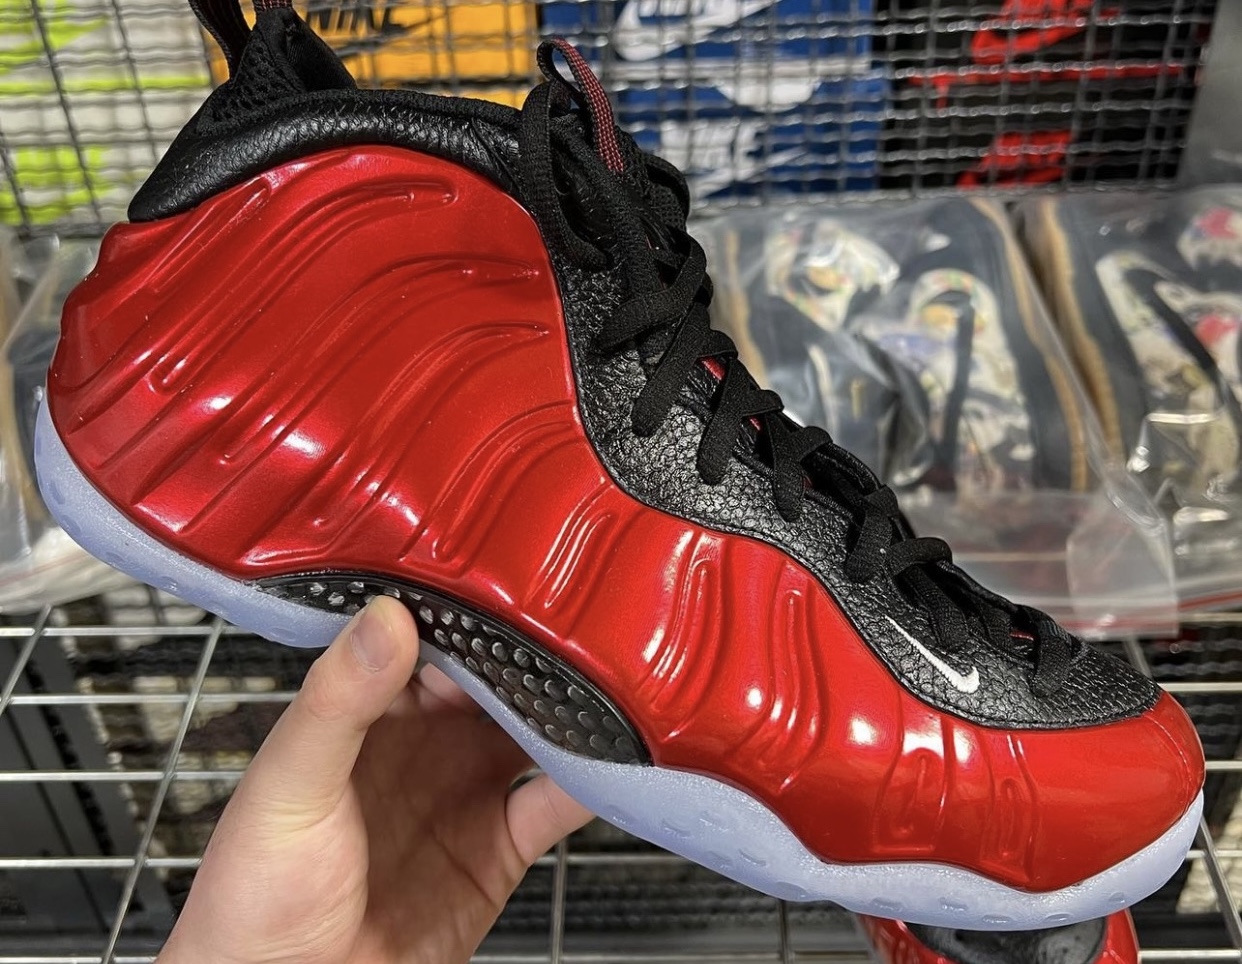 In-Hand Look at the Nike Air Foamposite One “Metallic Red” (2023)